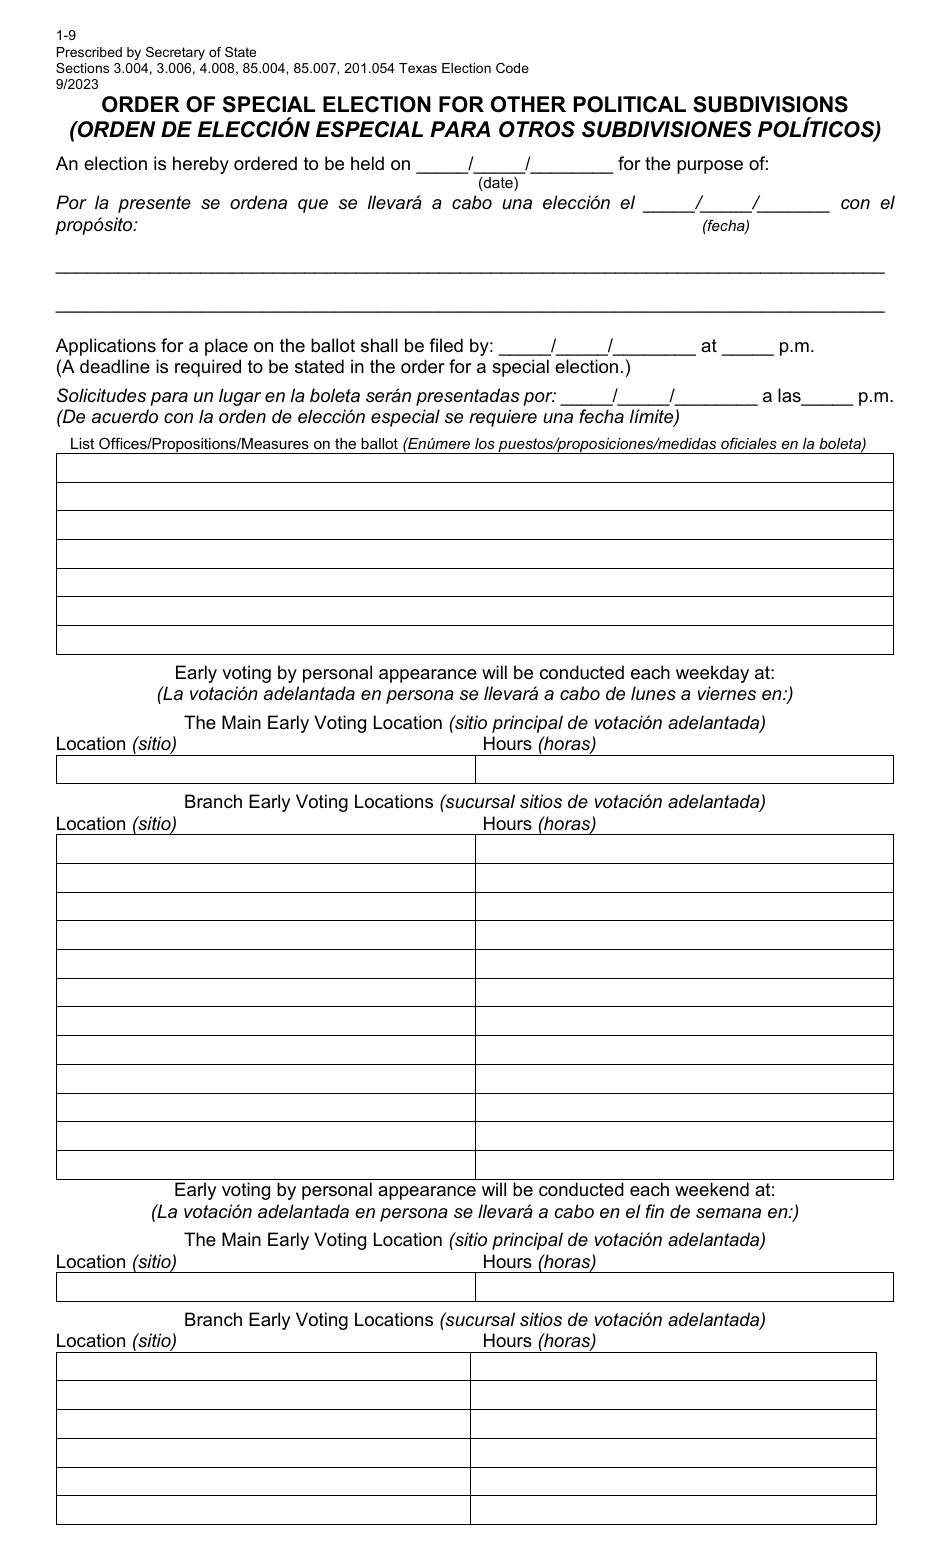 Form 1-9 Order of Special Election for Other Political Subdivisions - Texas (English / Spanish), Page 1